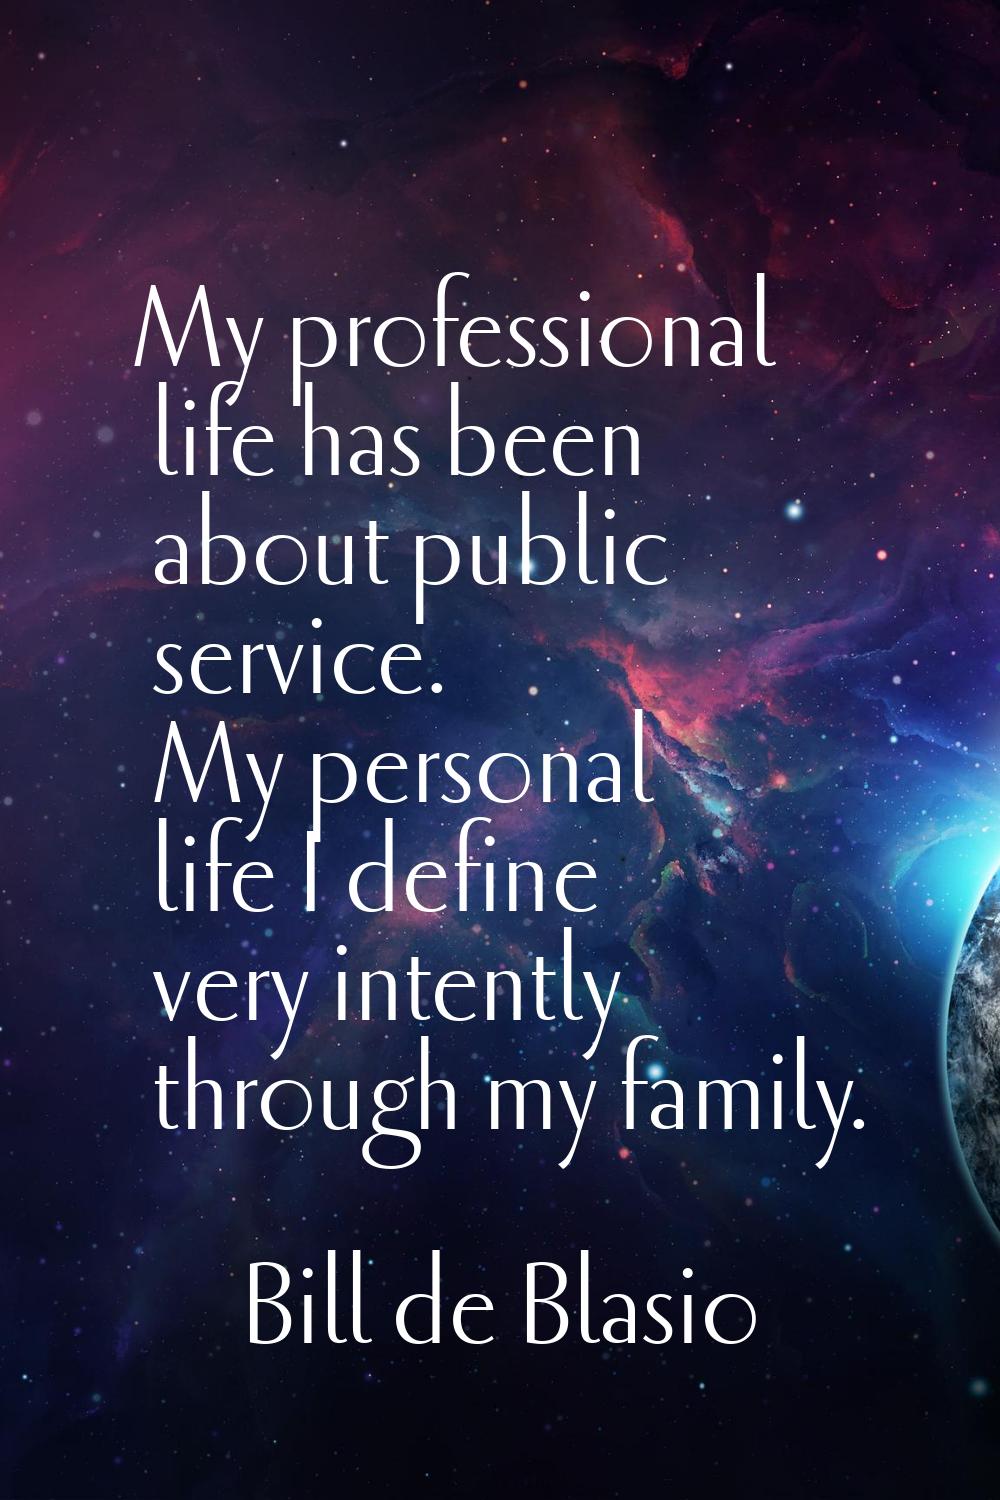 My professional life has been about public service. My personal life I define very intently through